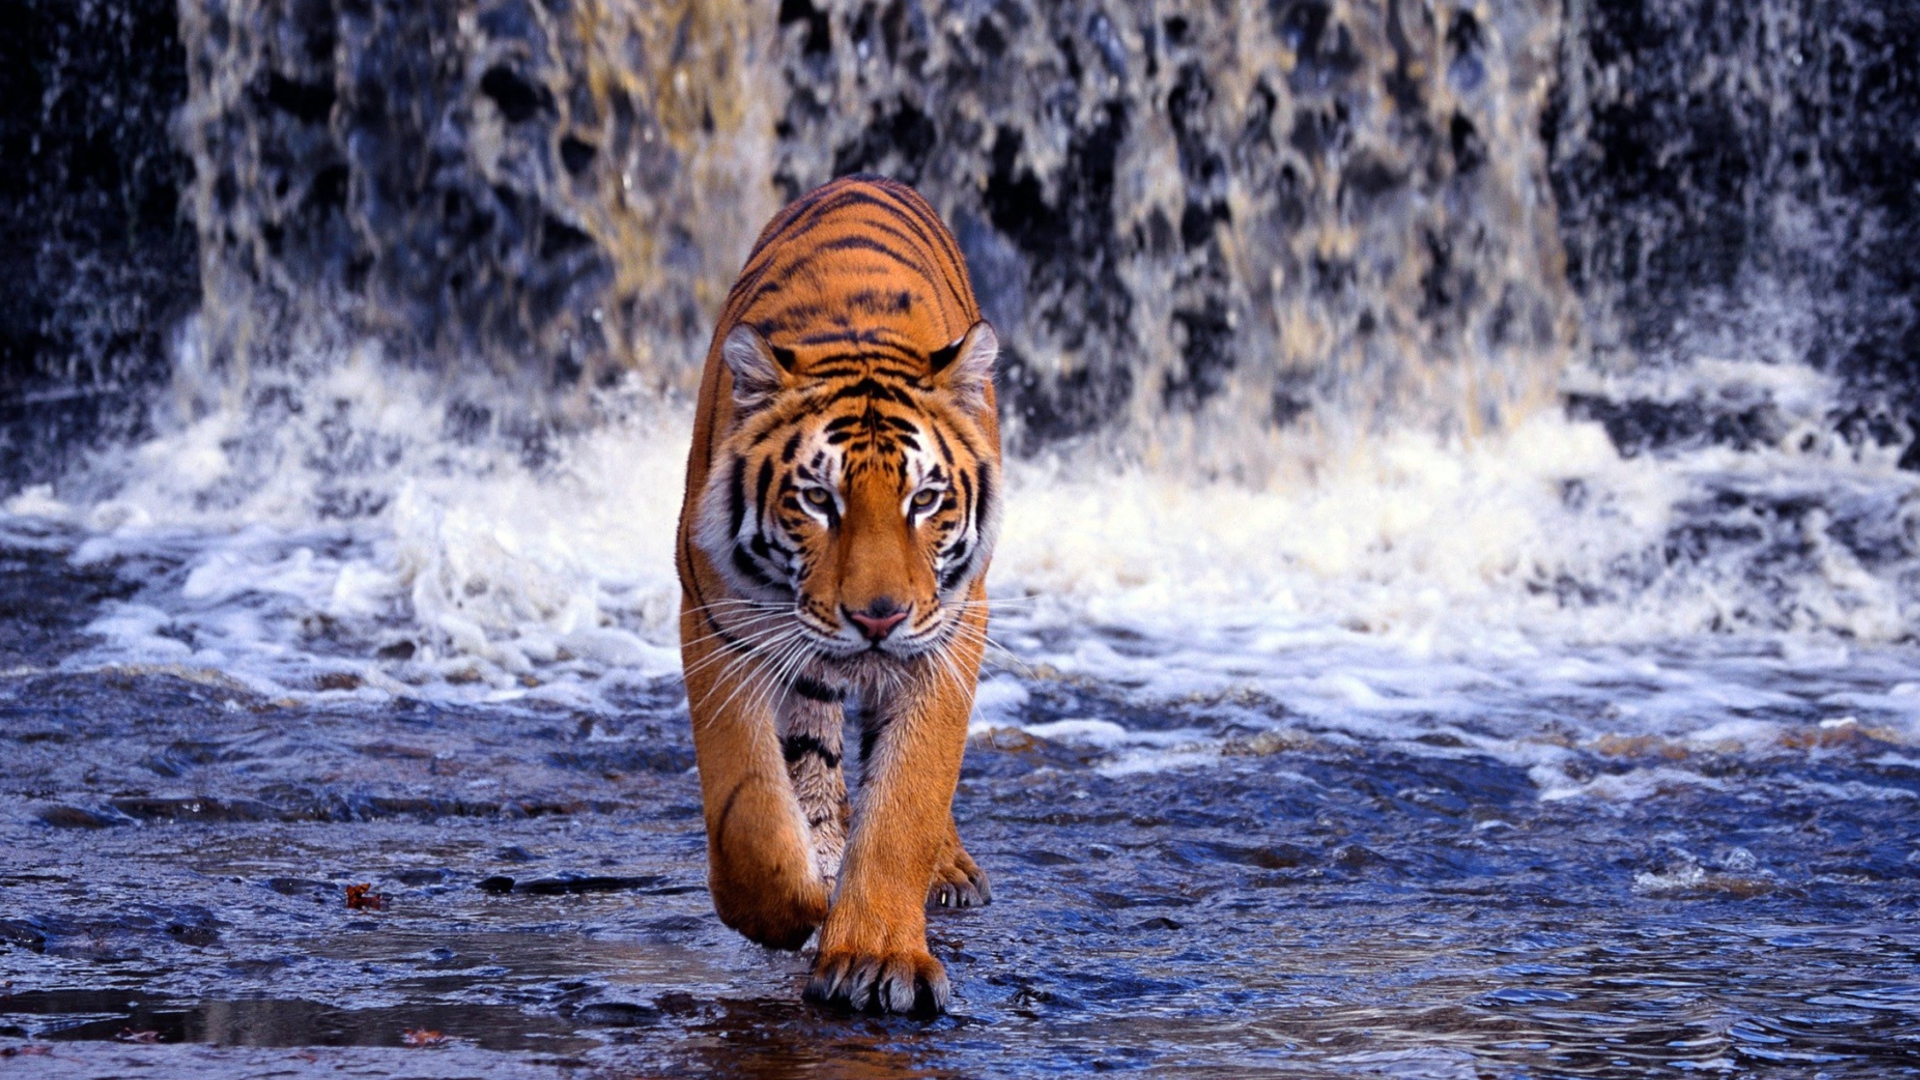 Das Tiger And Waterfall Wallpaper 1920x1080